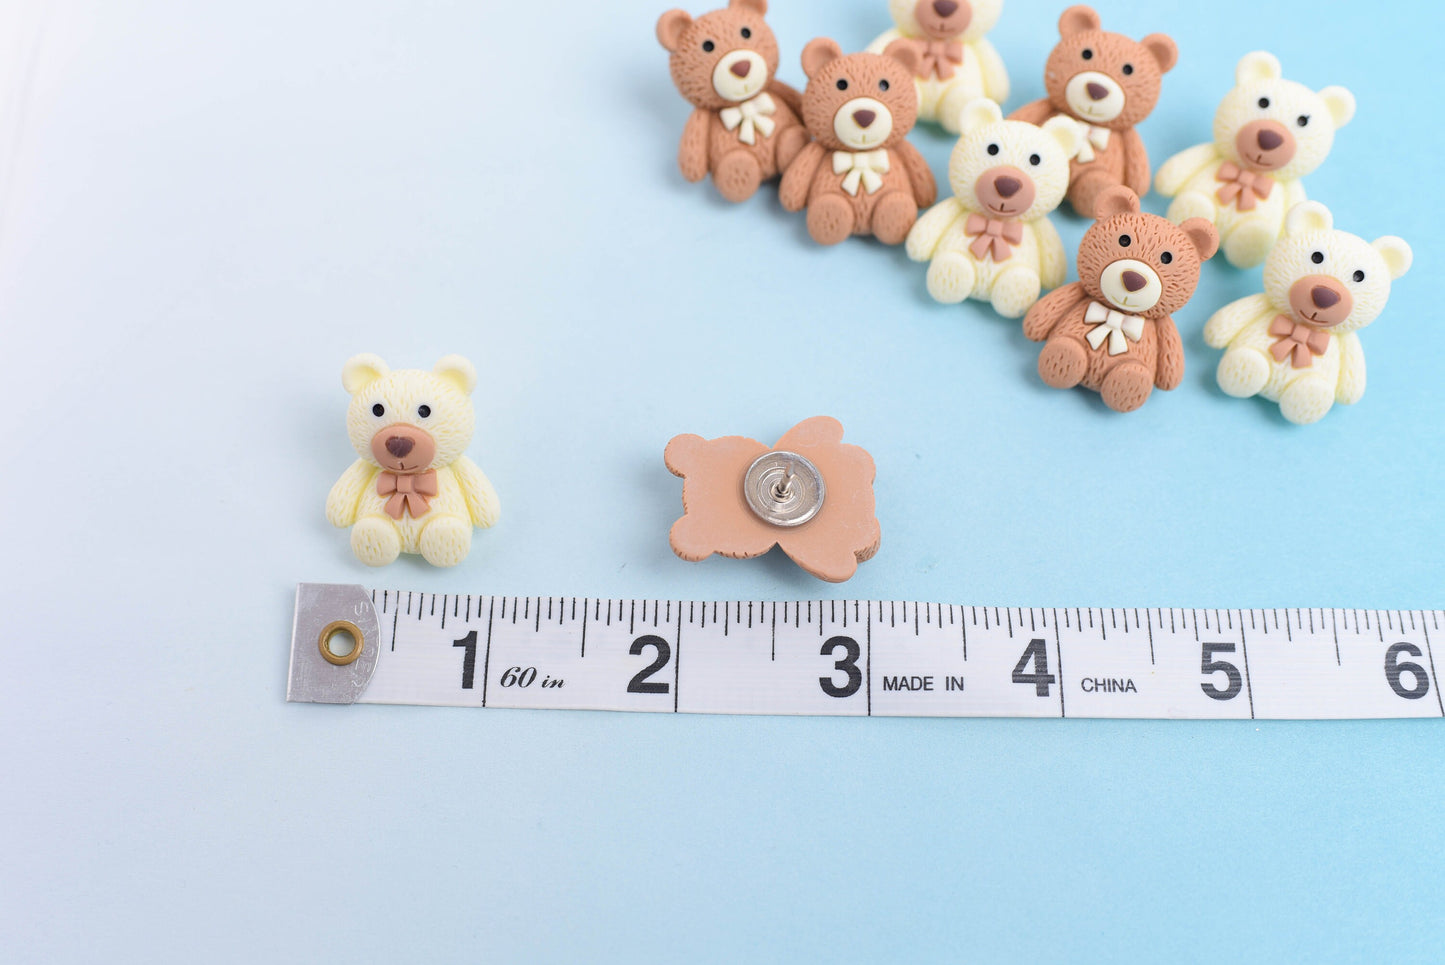 Teddy Bear Push Pins OR Magnets- Set of 10